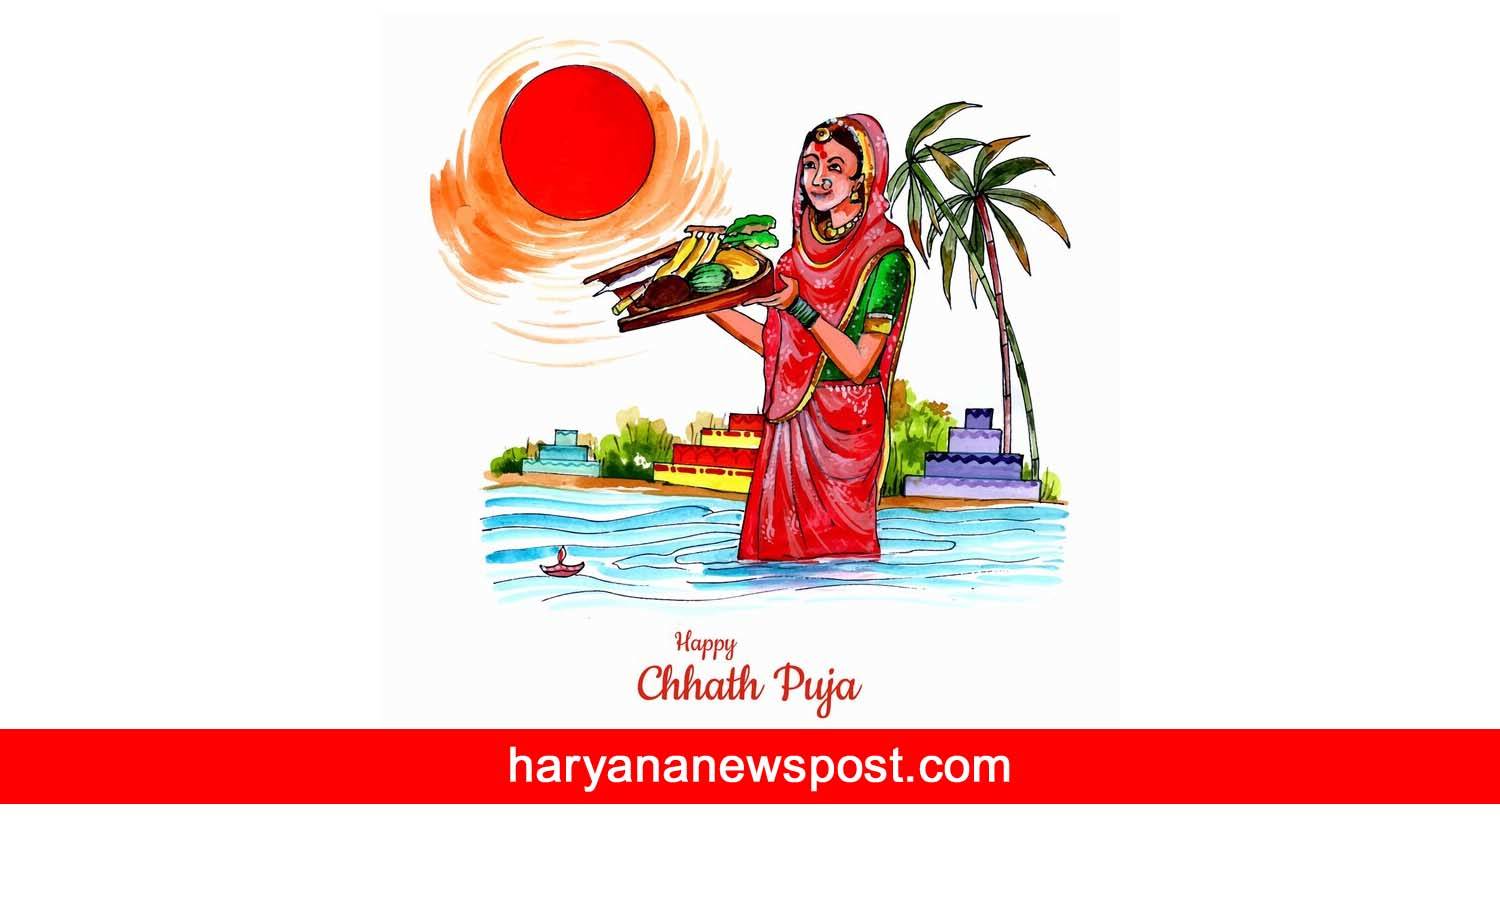 Happy Chhath Puja images, cards, photos, gifs, and posters